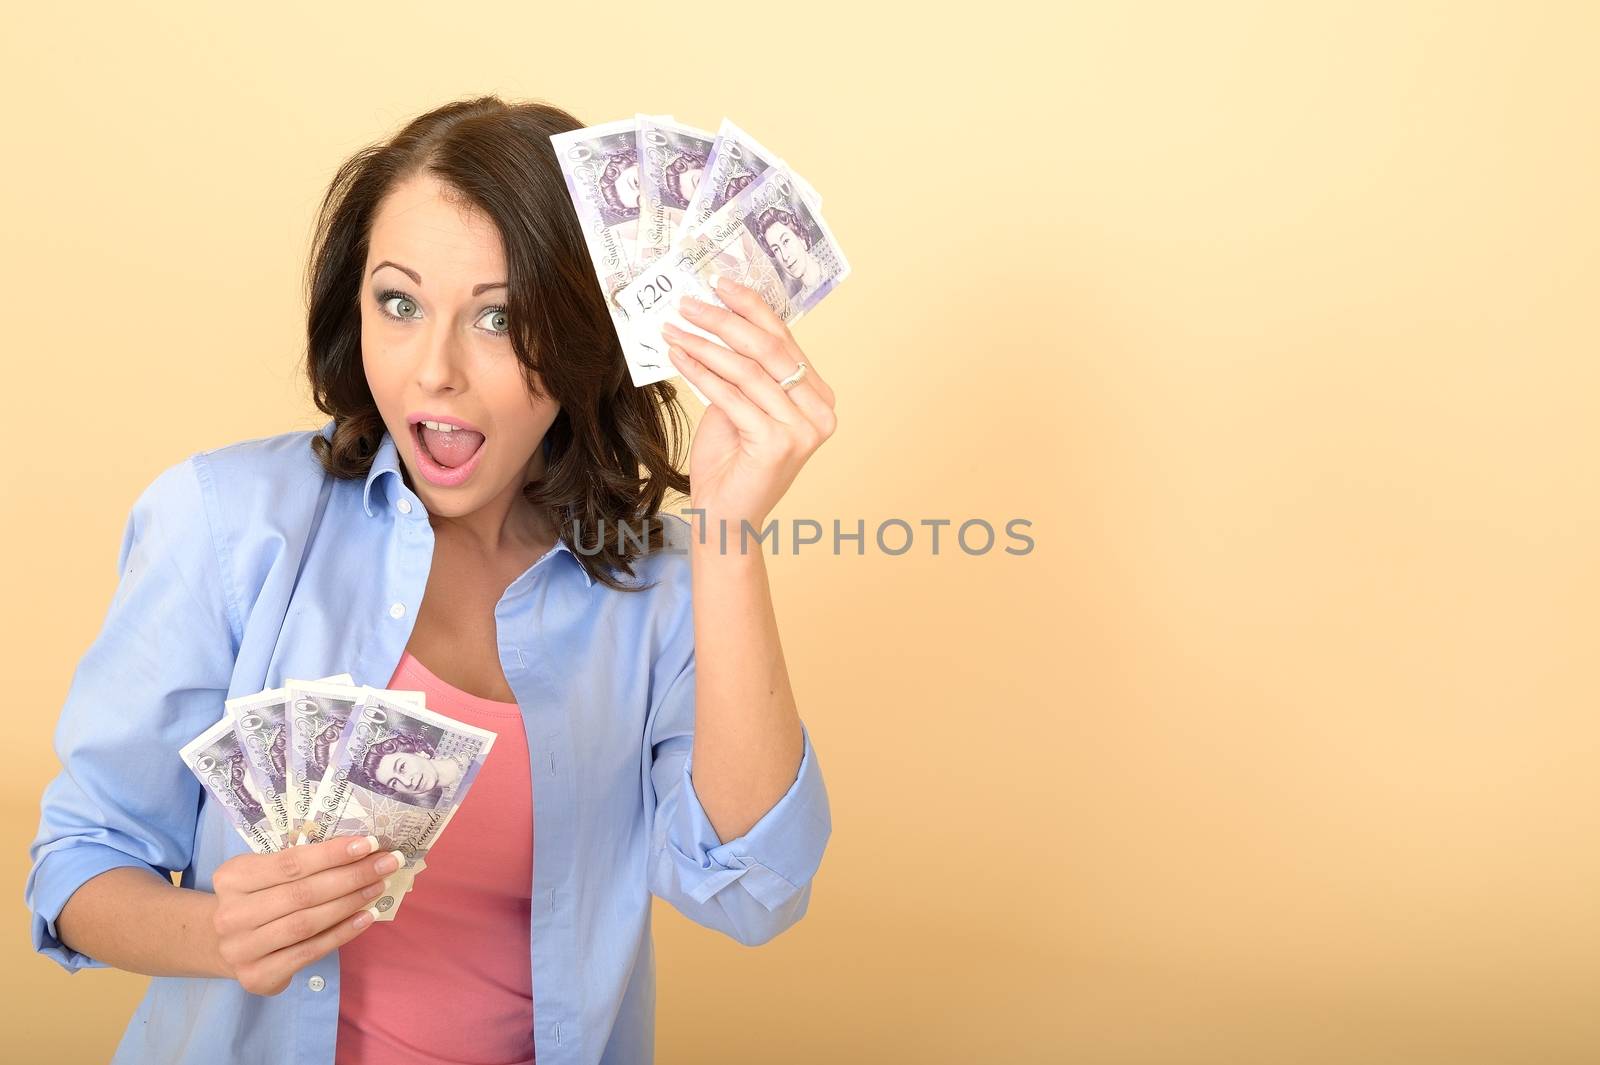 Attractive Young Happy Woman Holding Money Looking Pleased and Delighted Sitting on The Floor